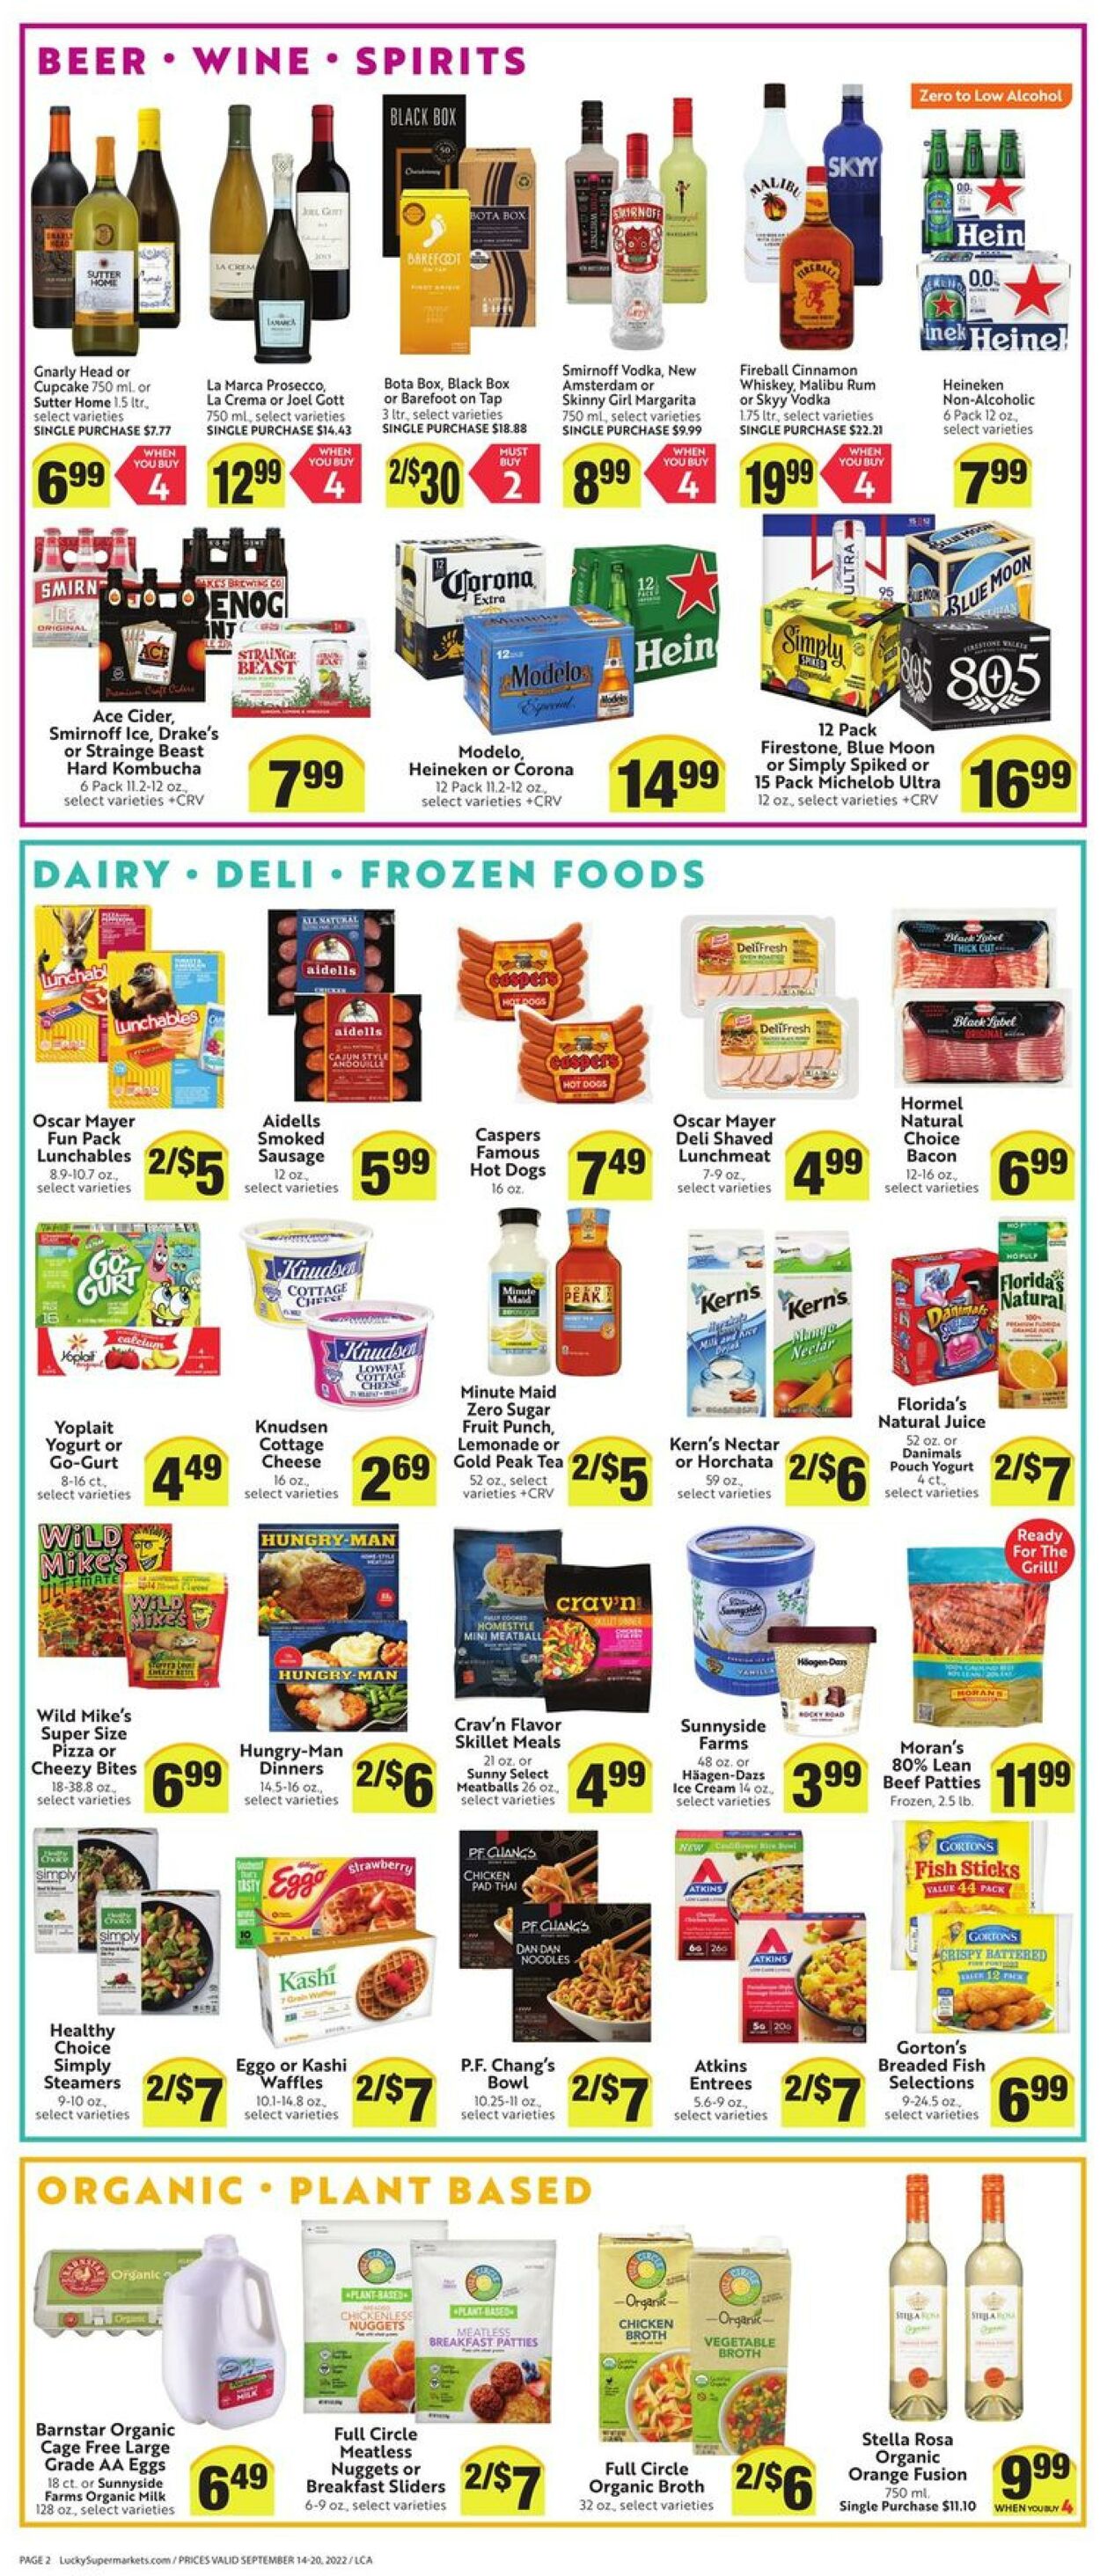 Weekly ad Lucky Supermarkets 09/14/2022 - 09/20/2022